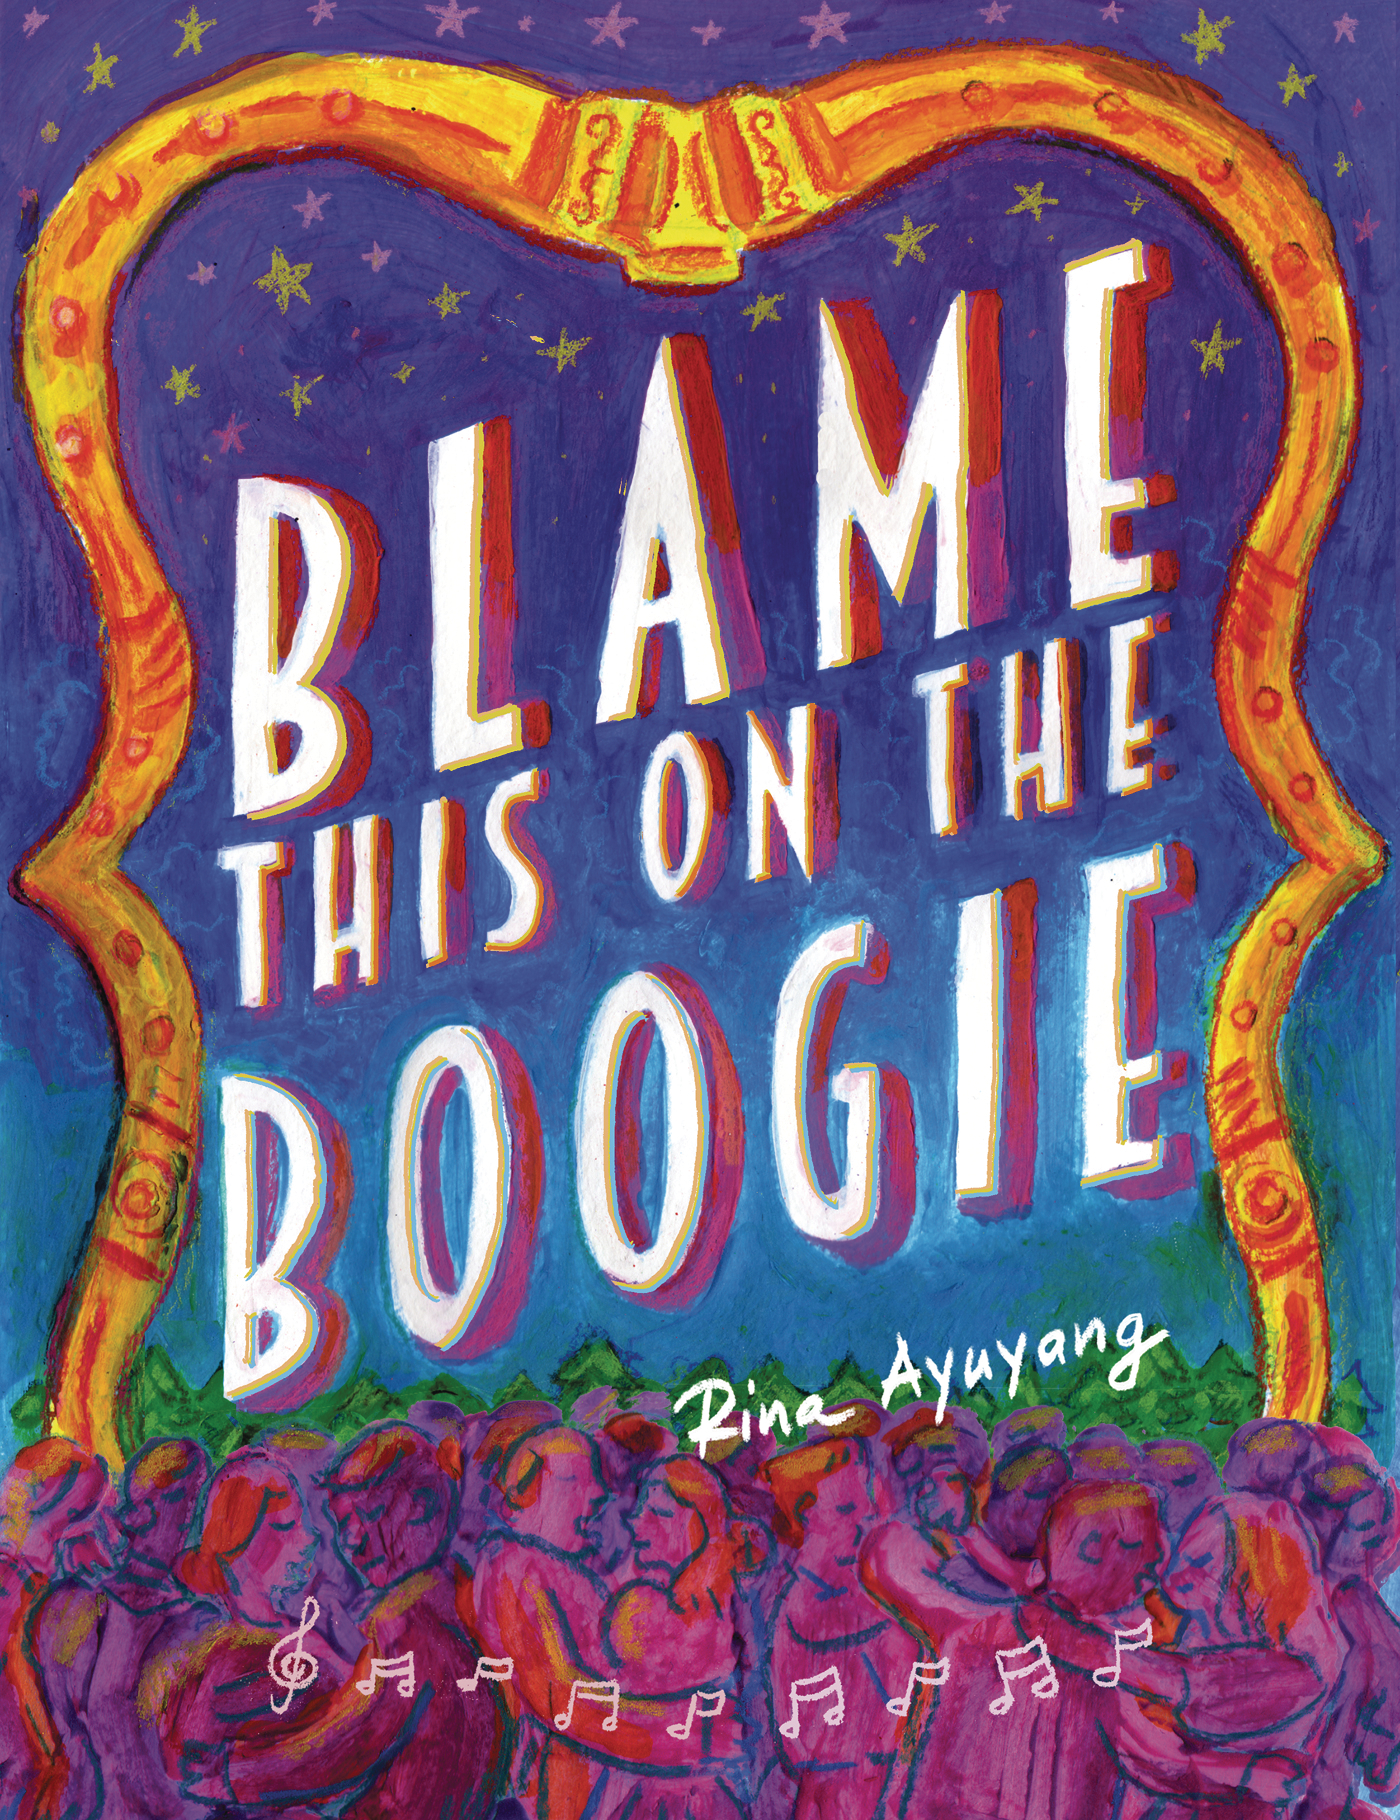 Blame This On the Boogie Graphic Novel (Mature)